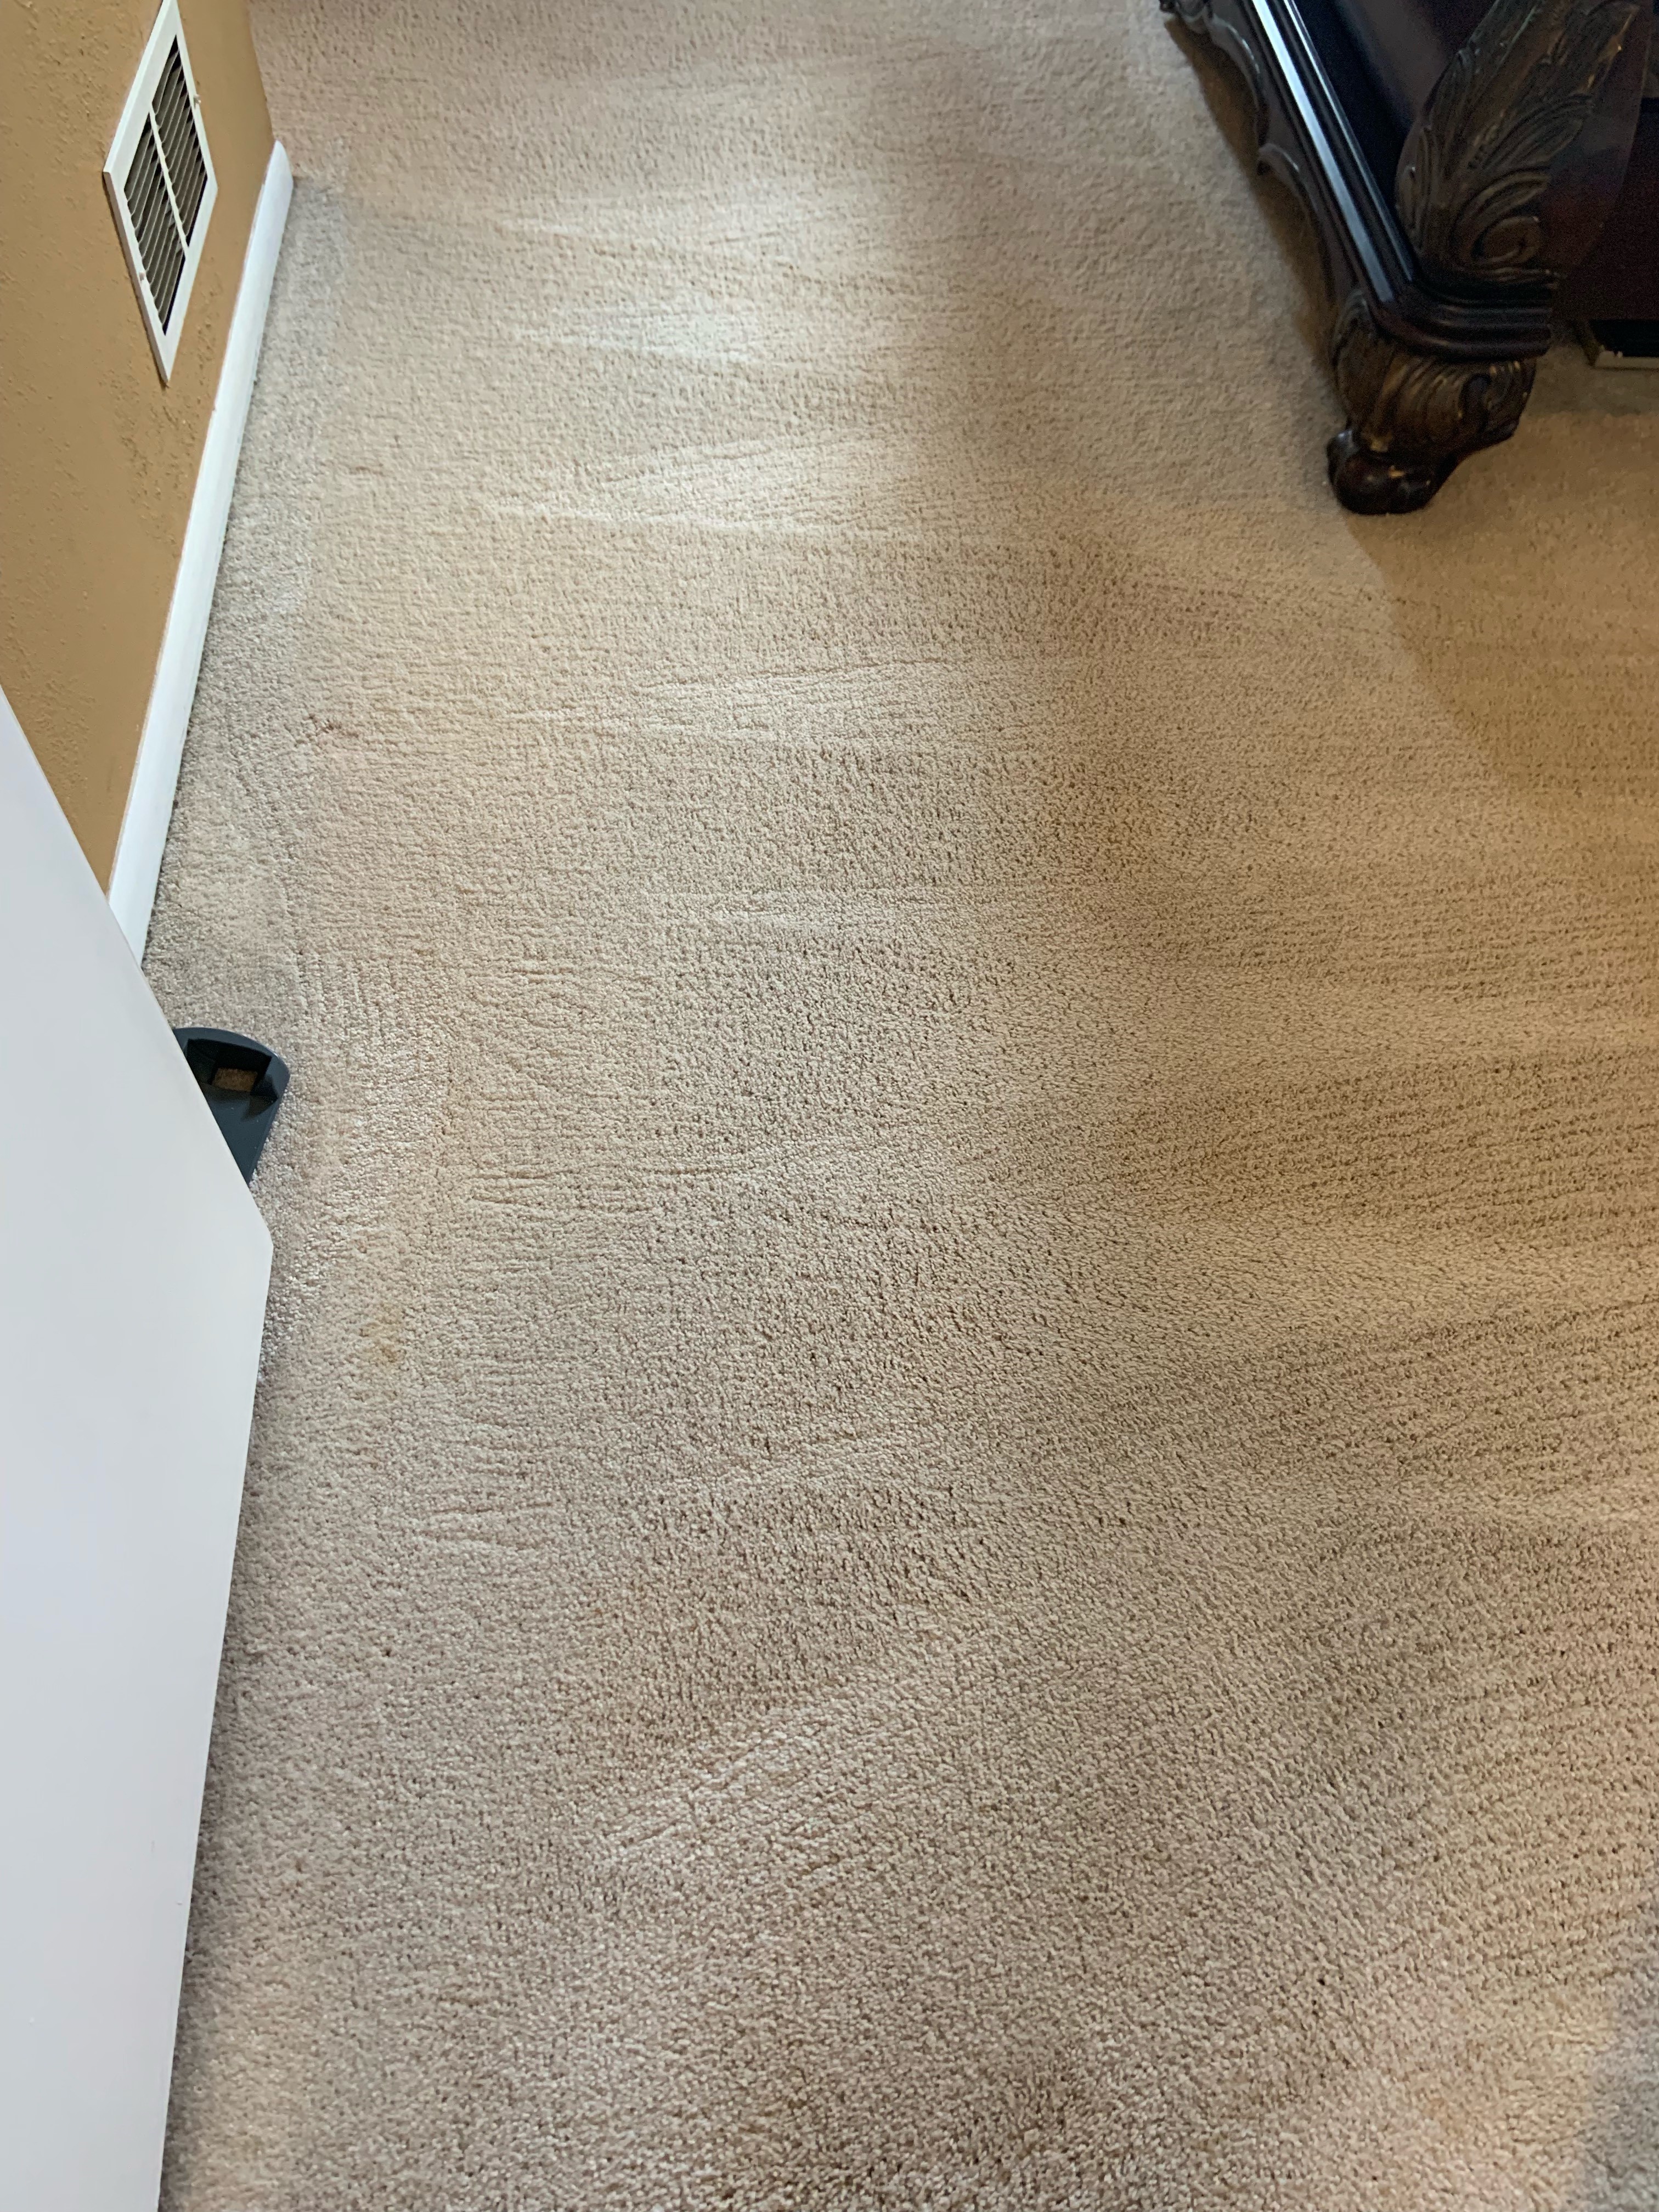 We are the top choice for dry carpet cleaning in and around New Albany, Ohio!  We also clean tile, g Brilliant Dry Carpet Care Columbus (614)591-4494